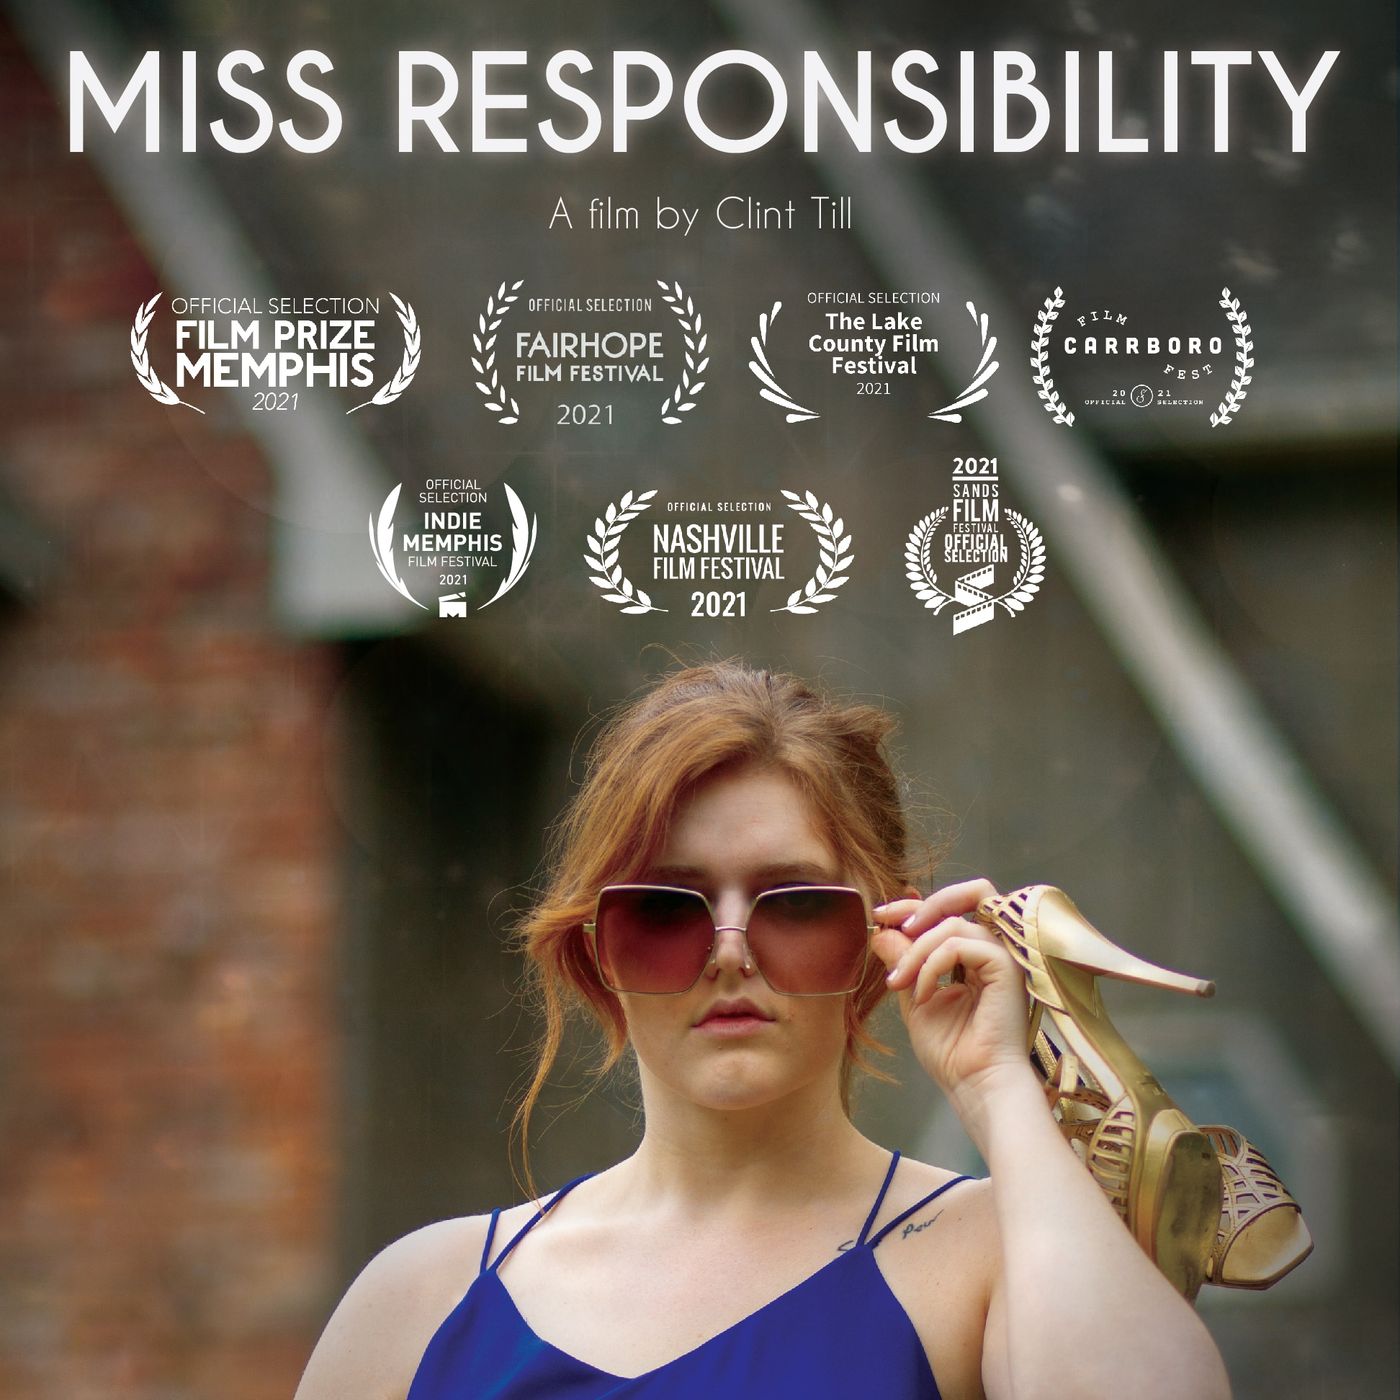 South Georgia Film Festival Official Selection ”Miss Responsibility” Director Clint Till